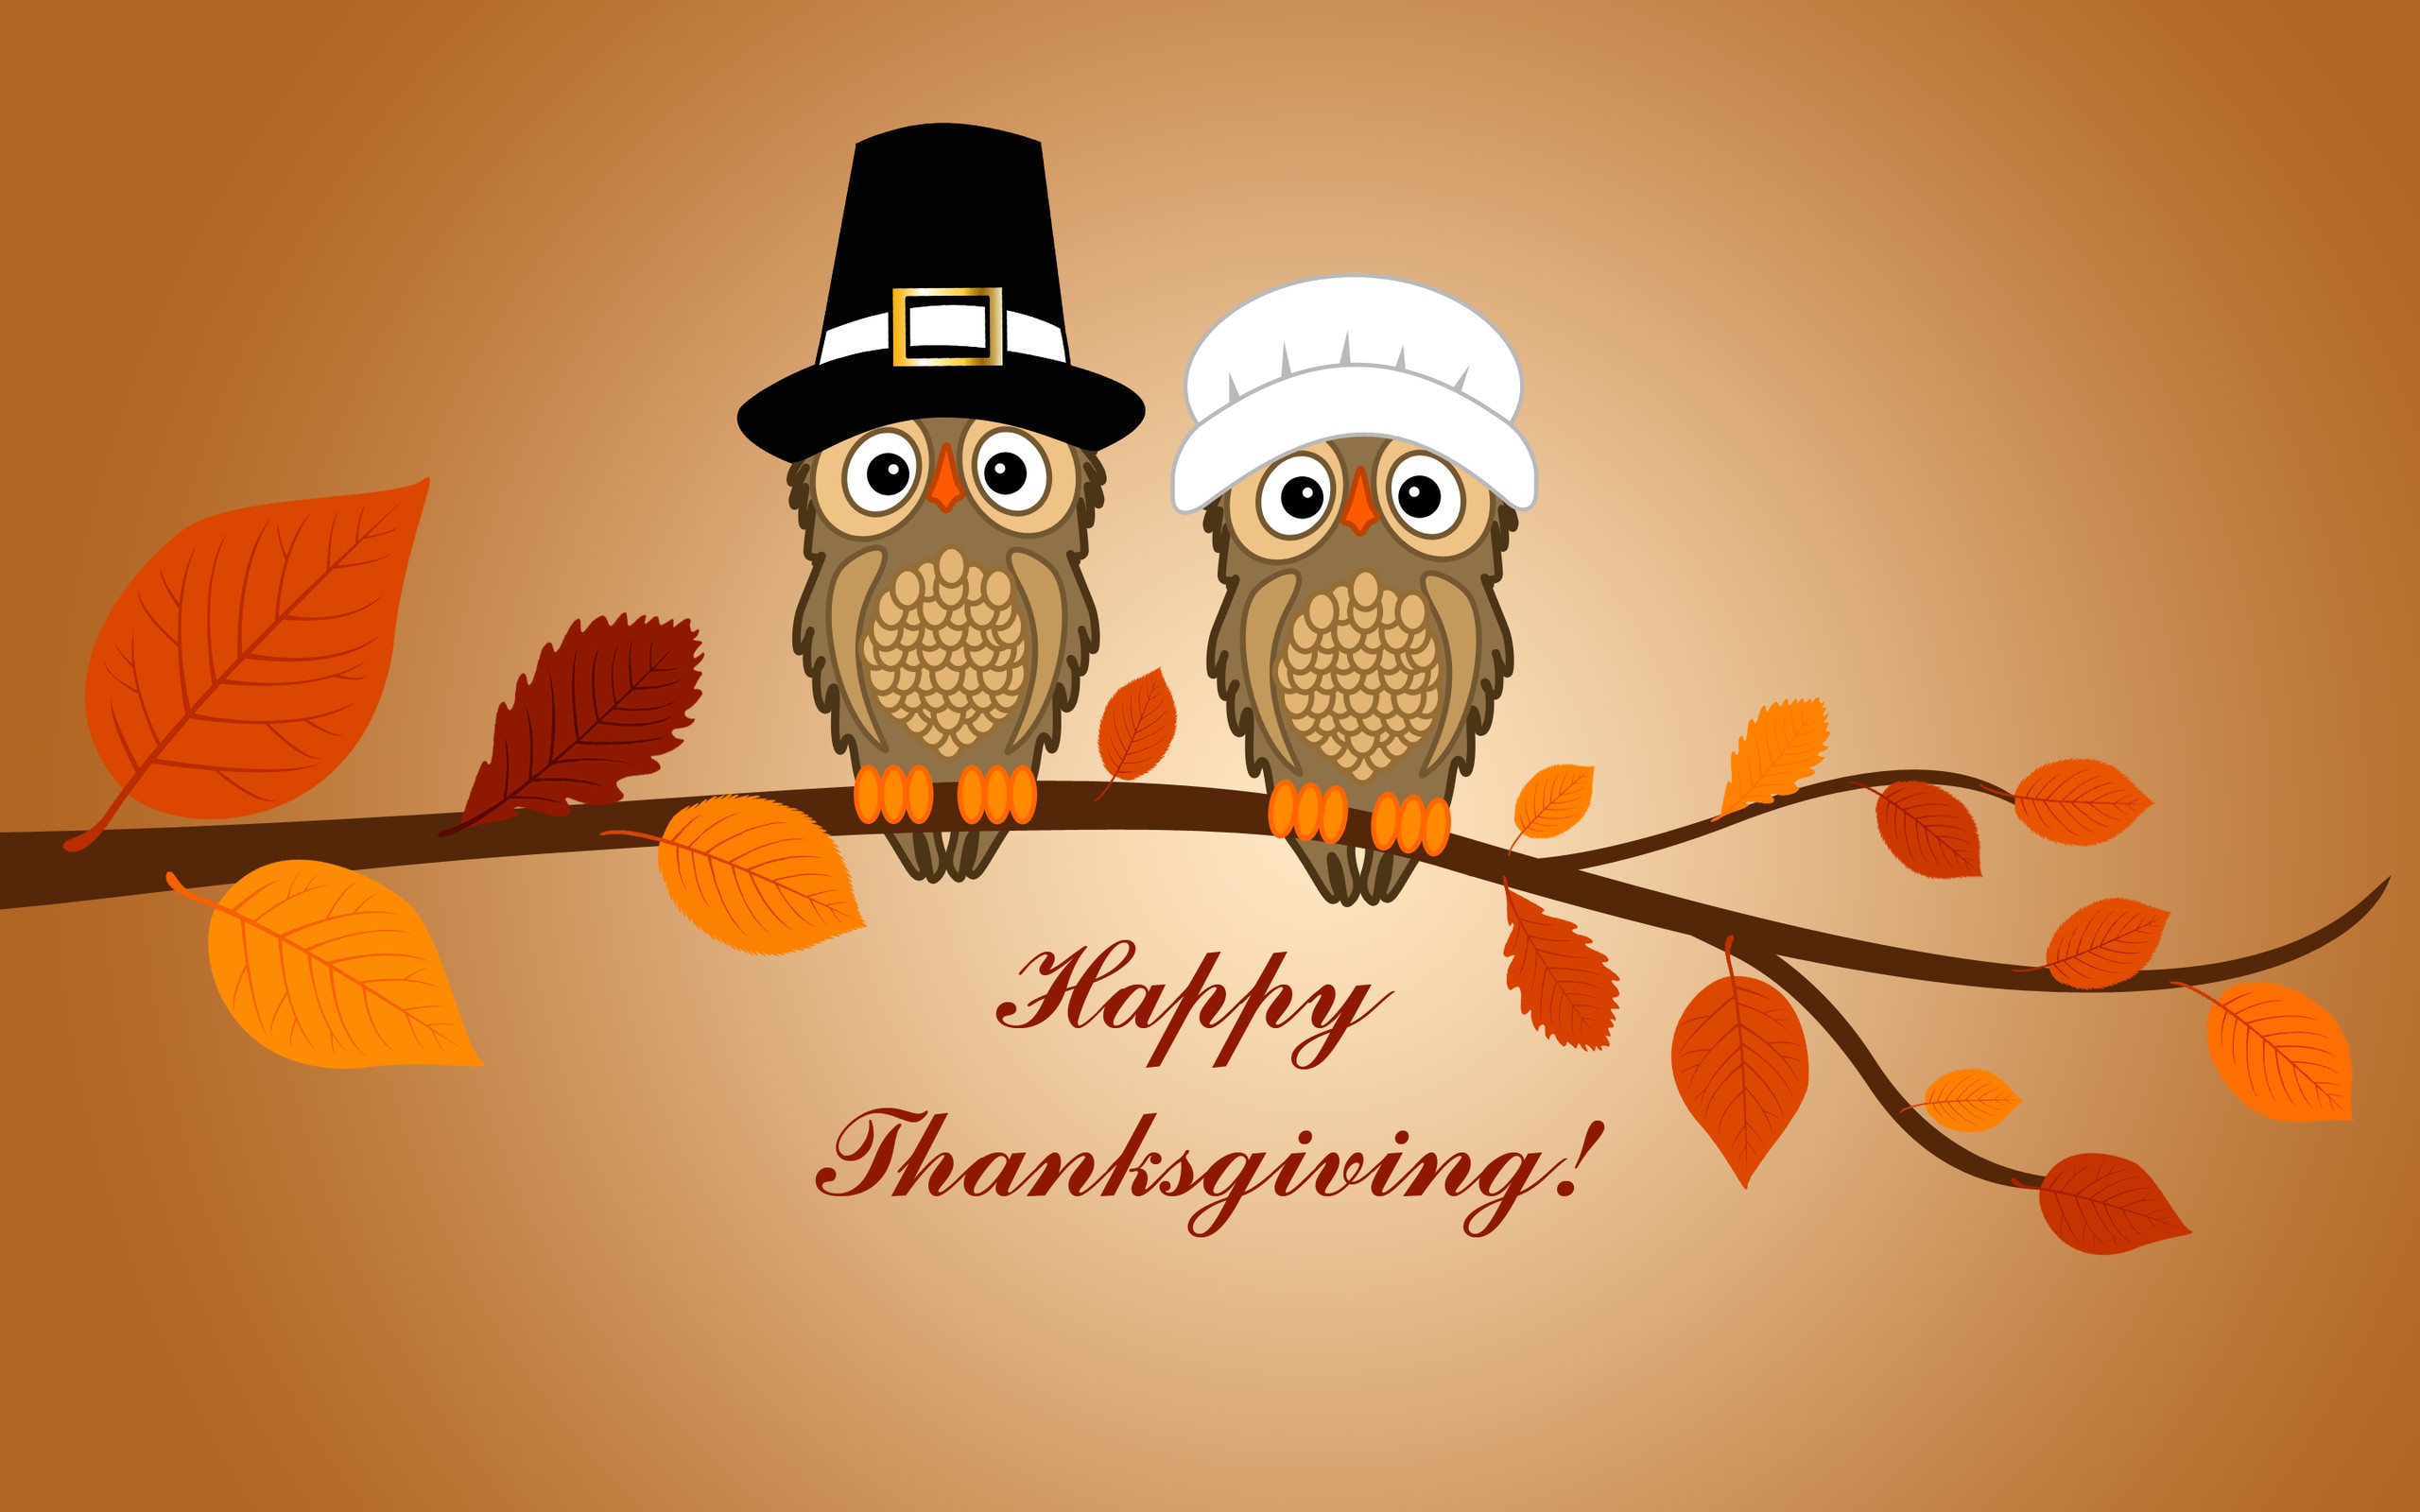 Thanksgiving HD wallpapers and Images for Kids